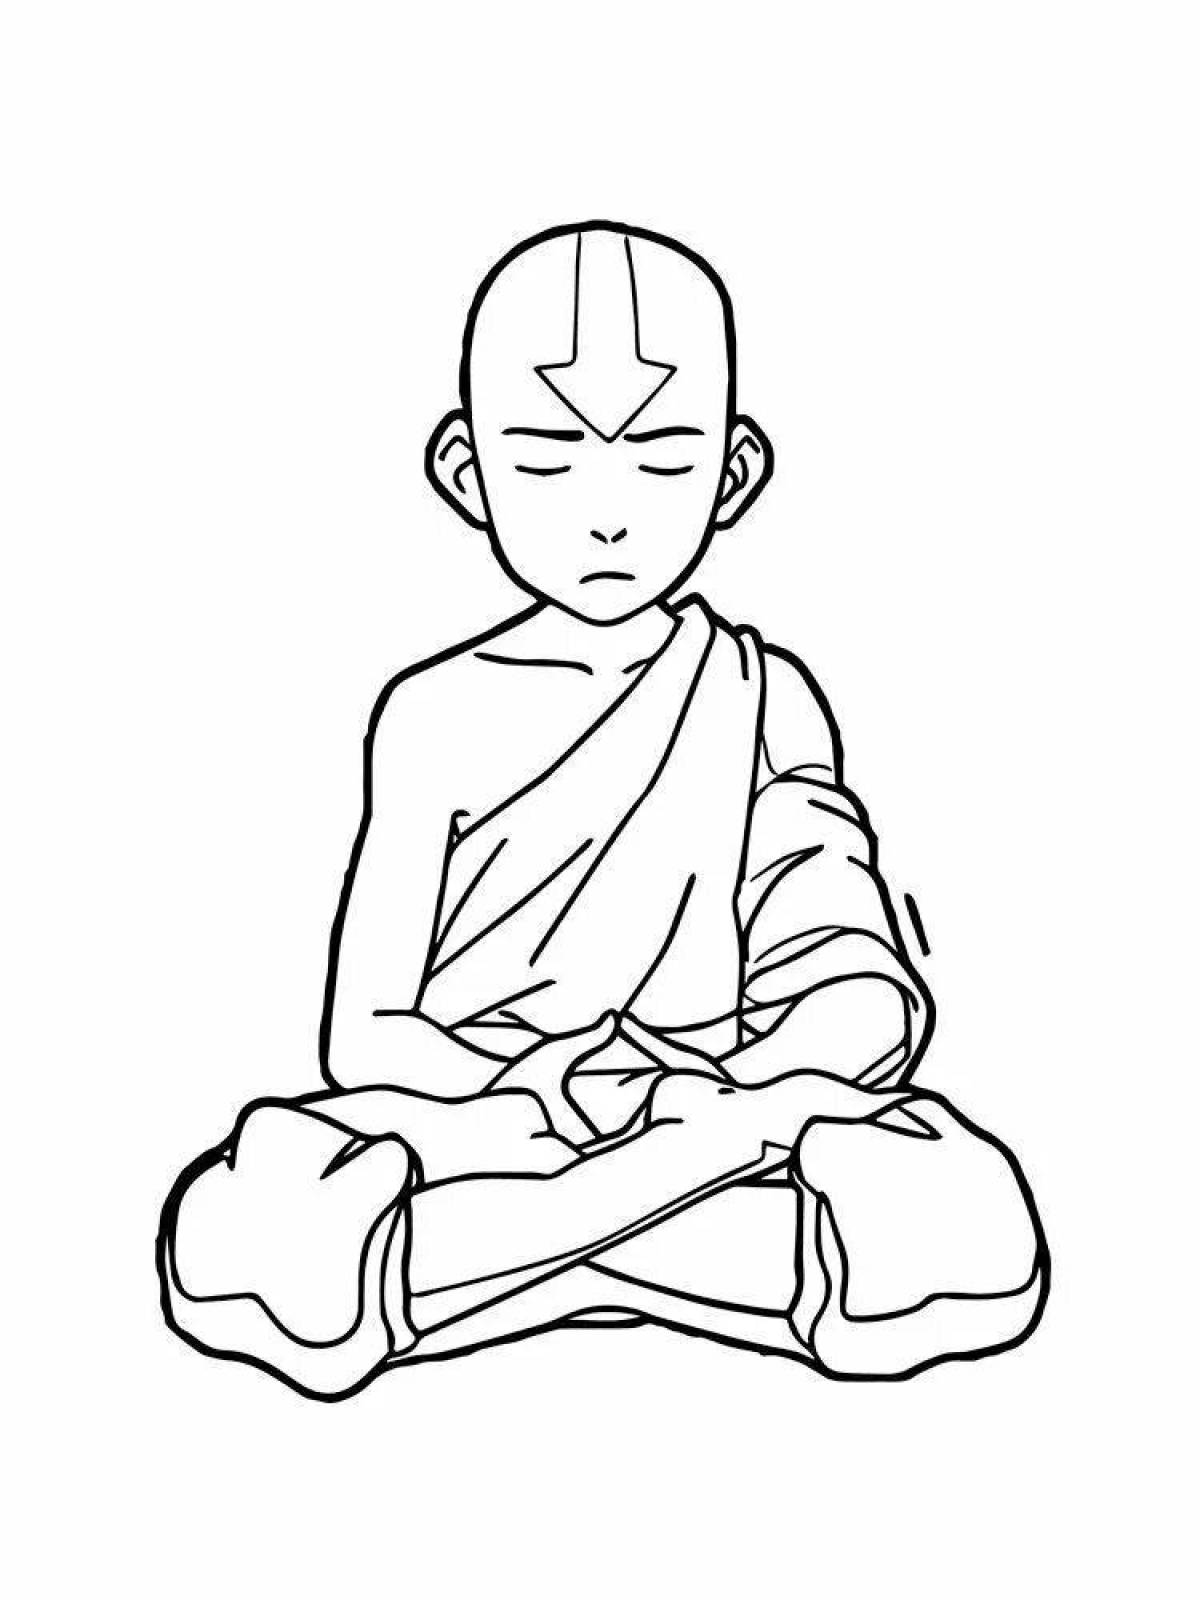 Aang's funny avatar coloring page